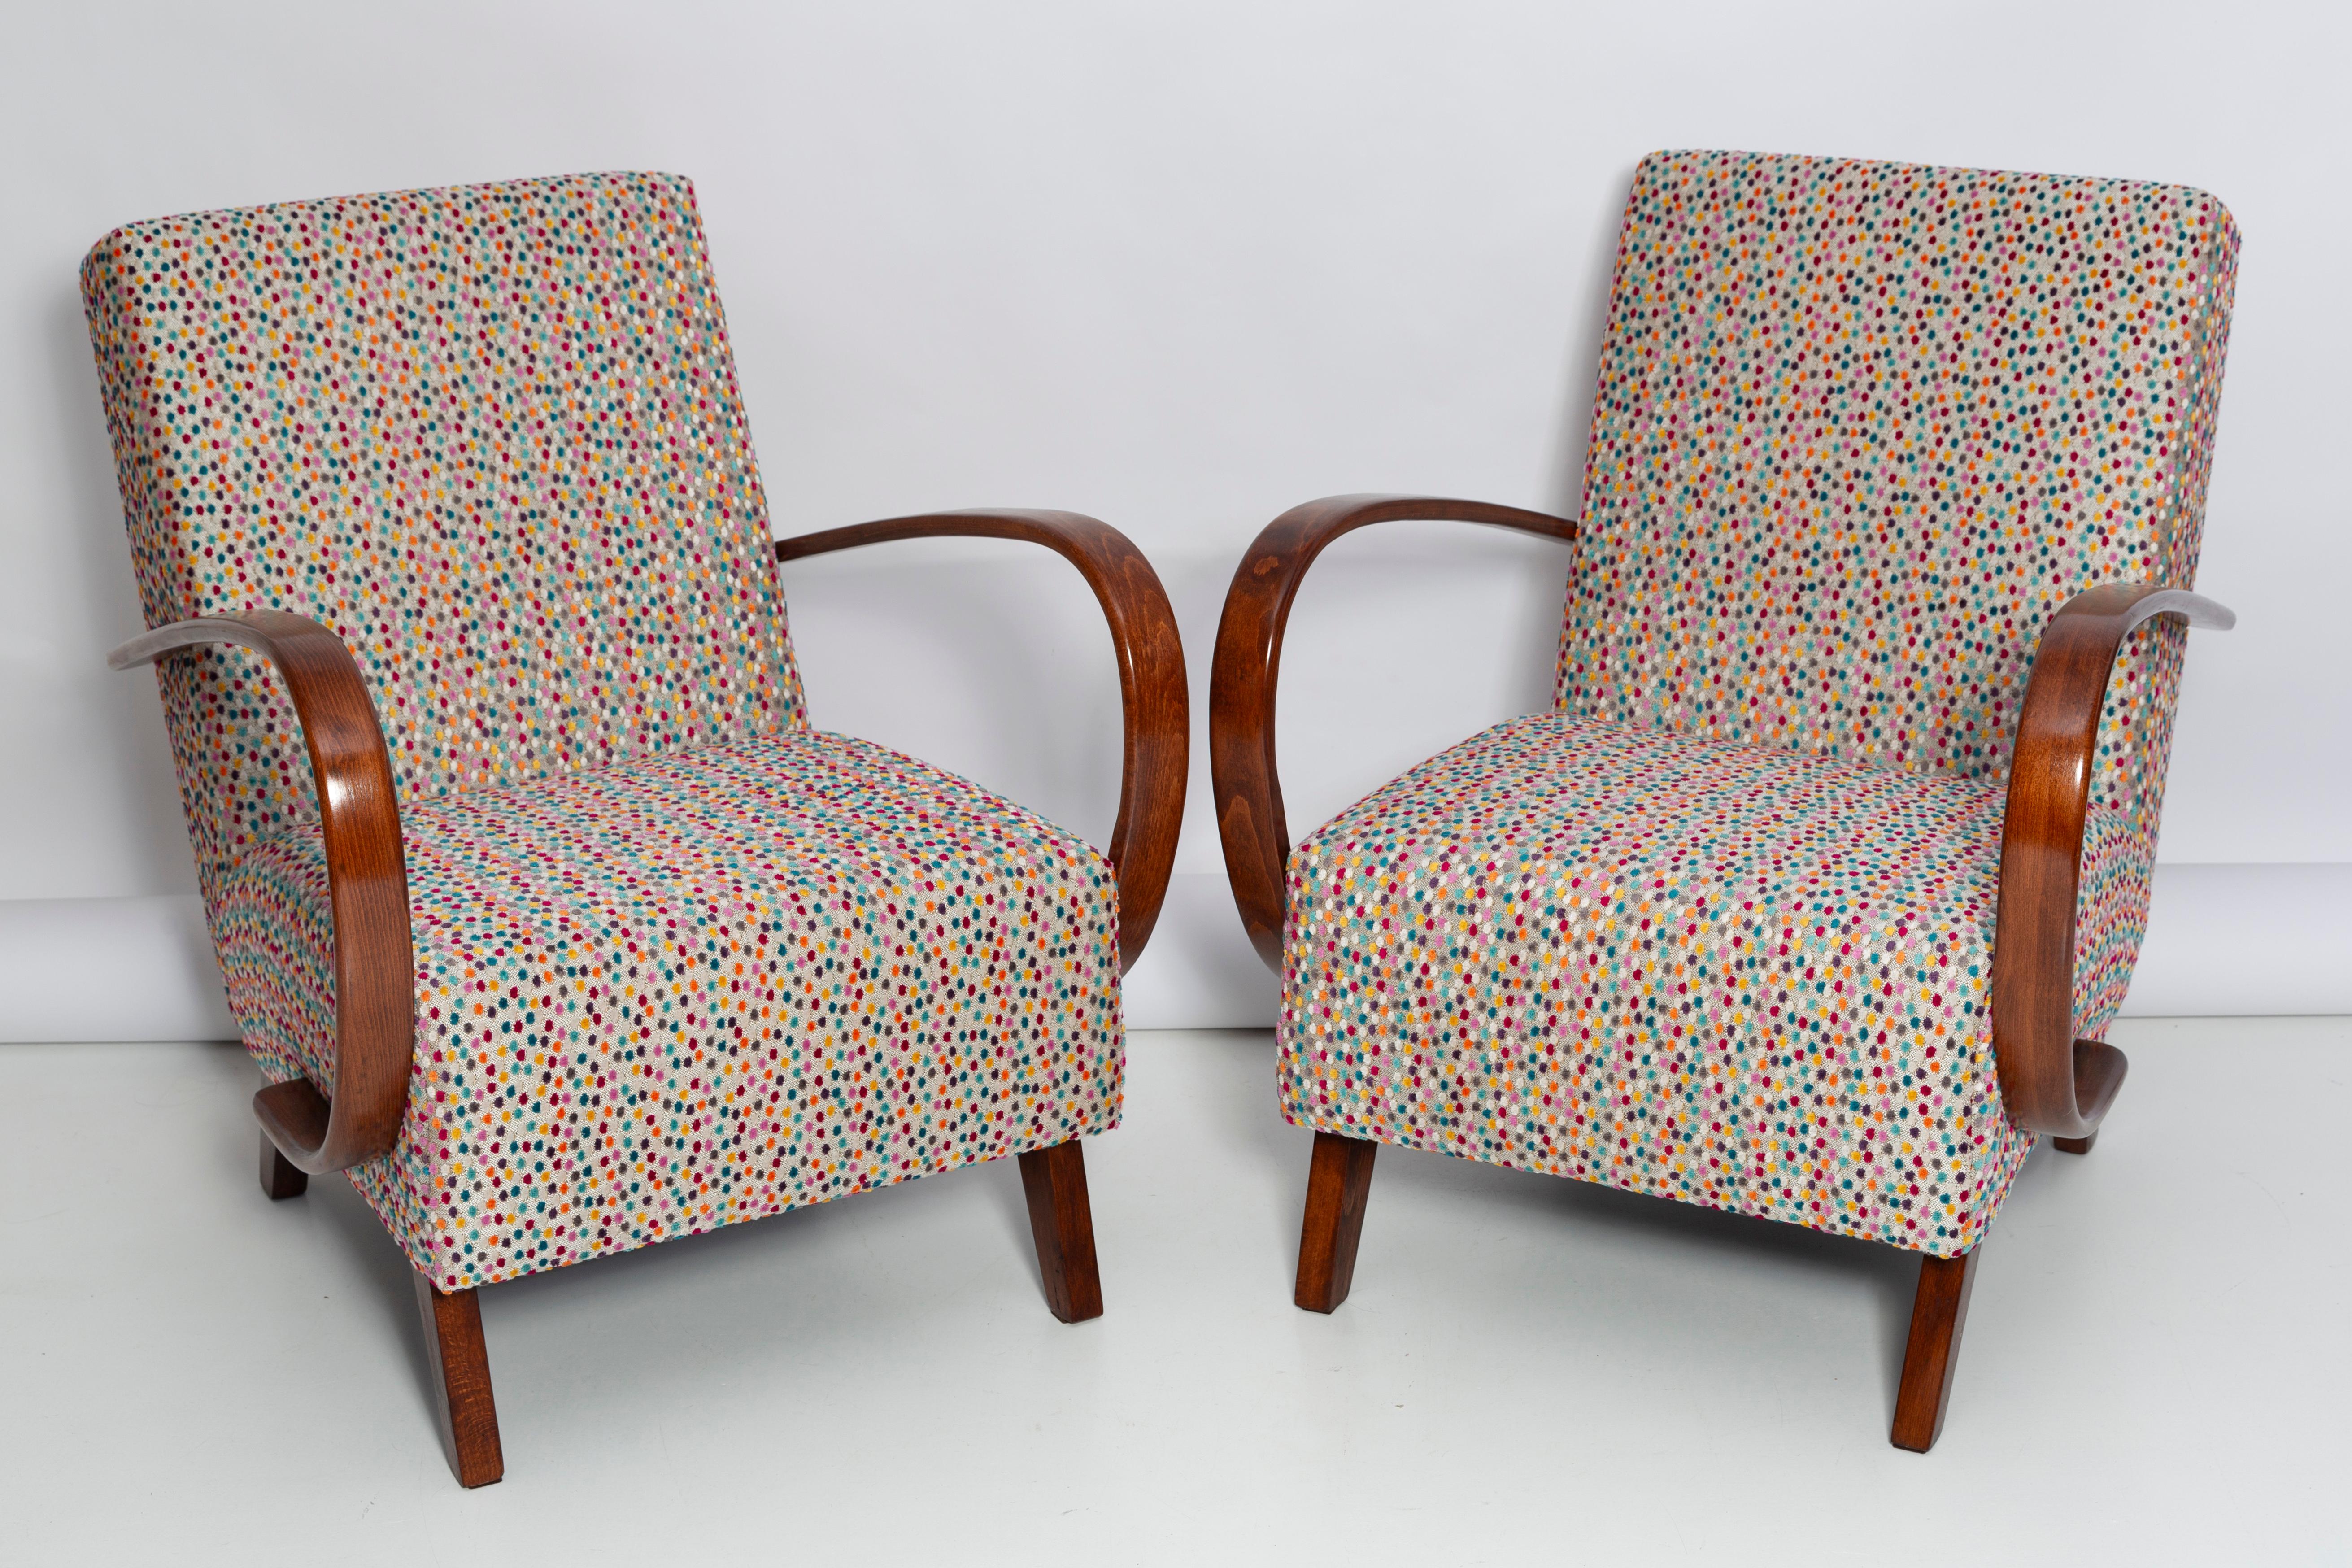 Two Mid Century Dots Velvet Armchairs and Table, Halabala Czech Republic, 1950s For Sale 2